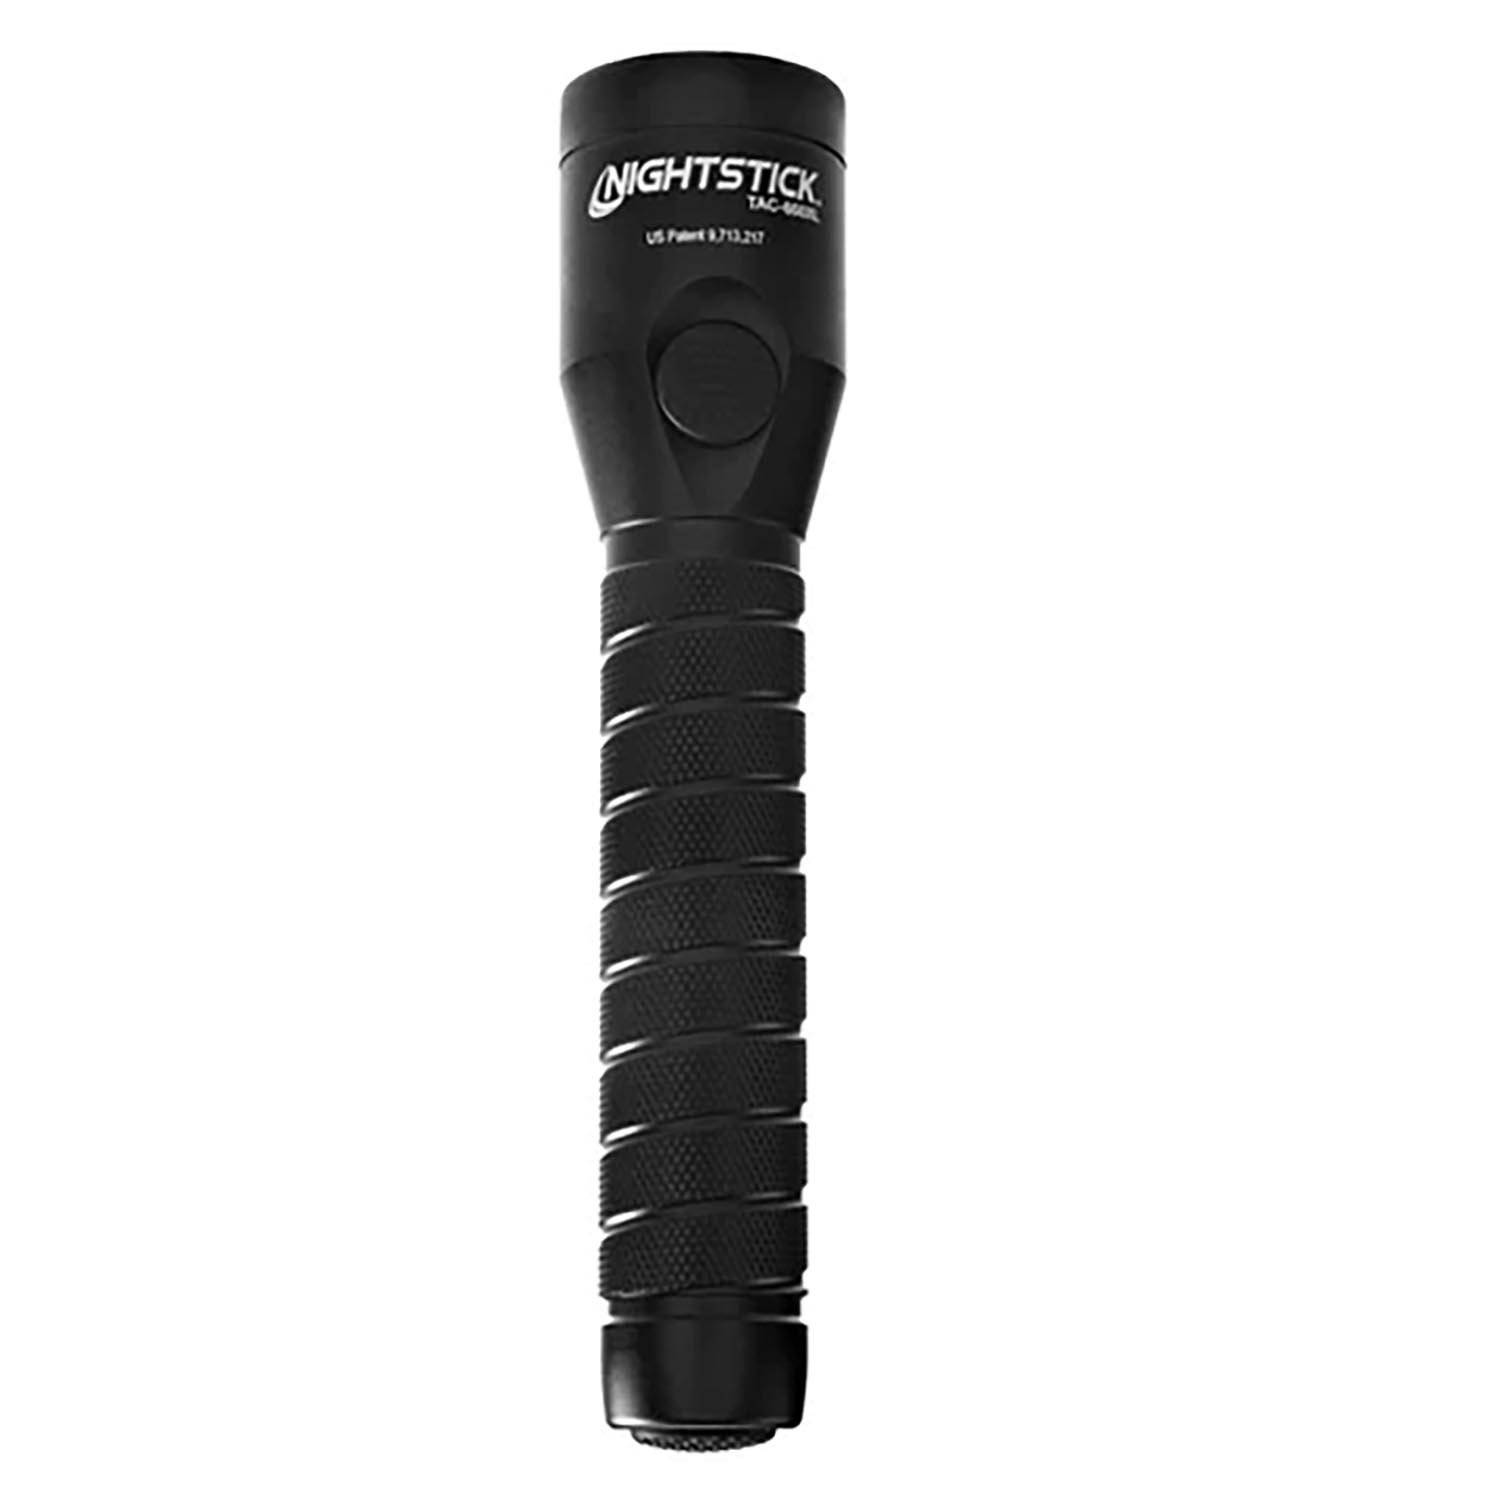 Nightstick TAC-660XL Rechargeable Tactical Flashlight